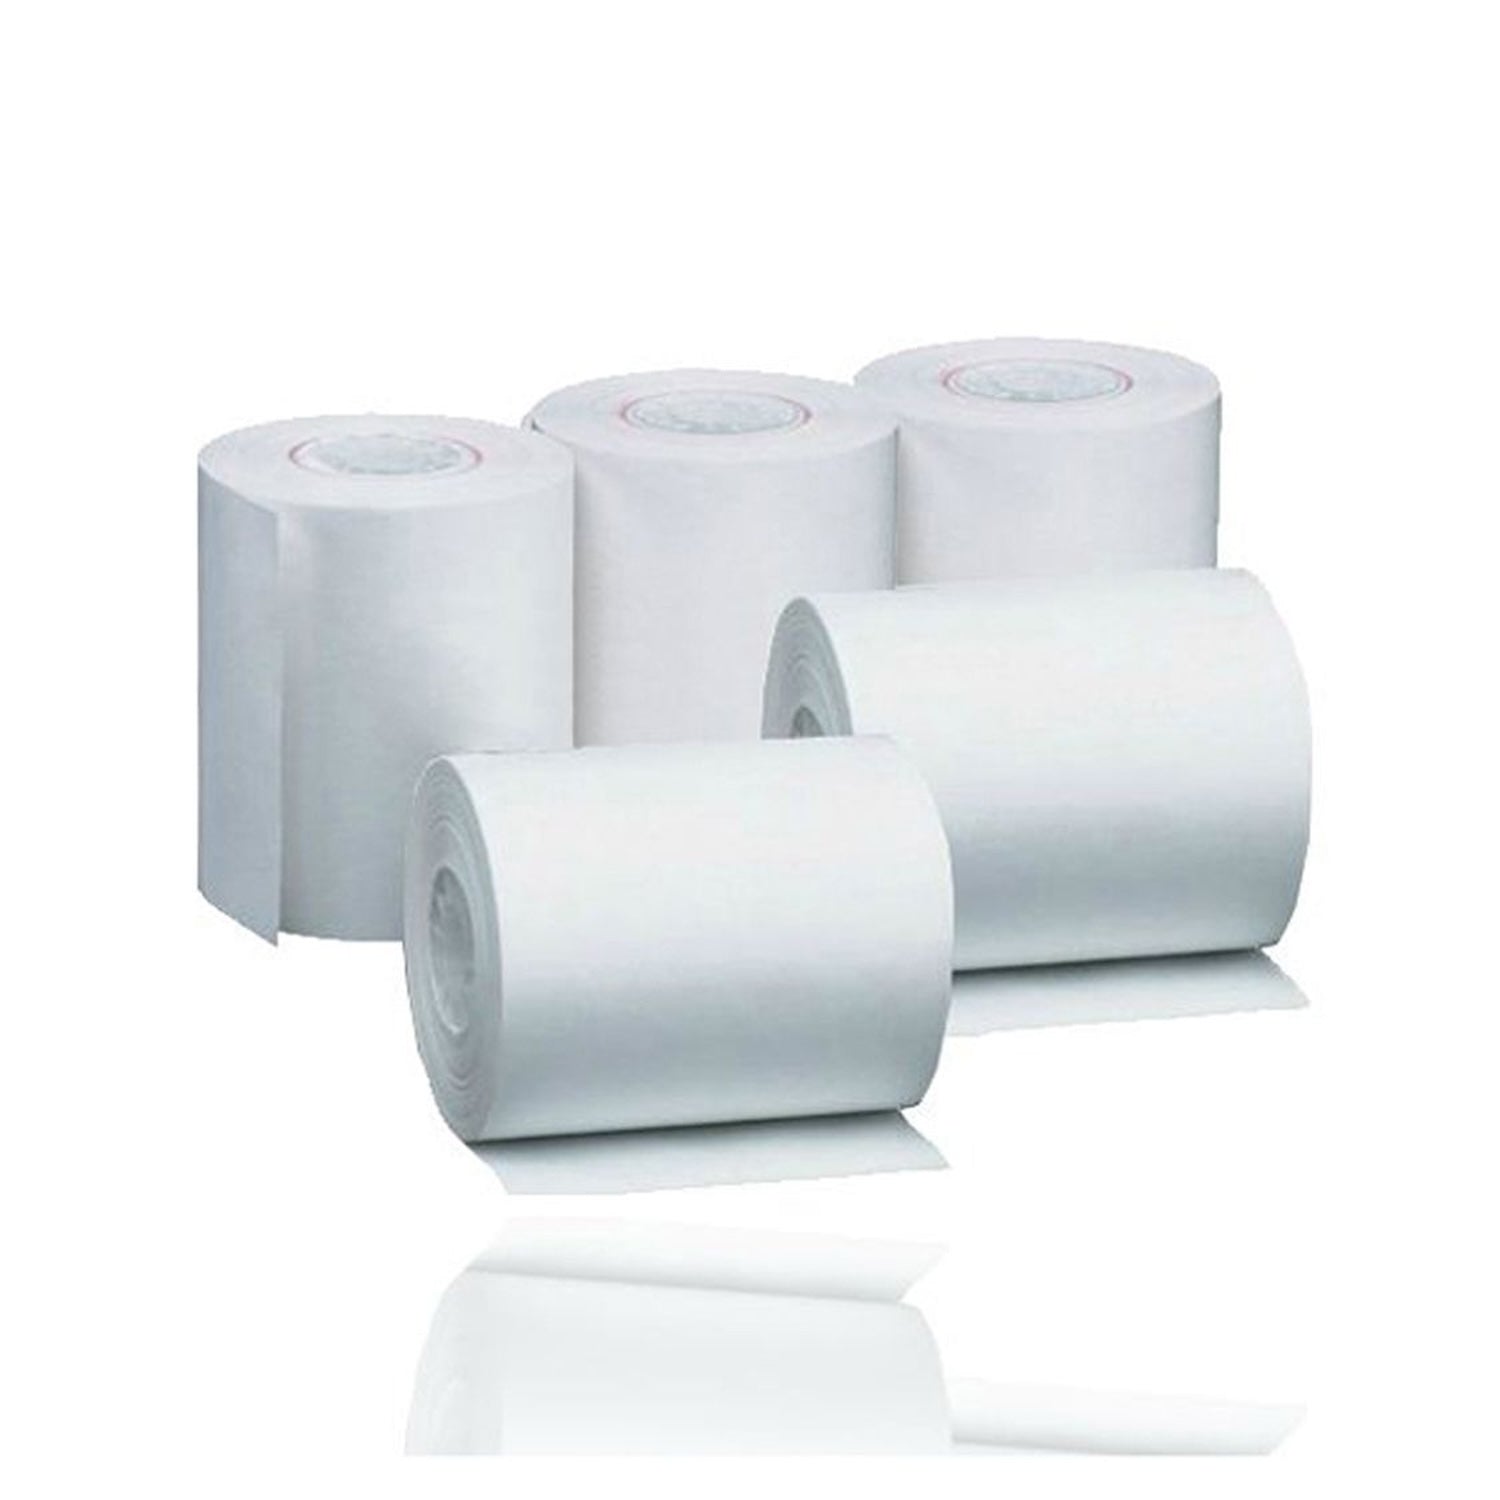 A&D Paper Rolls for TM|2650P and TM2655P | Pack of 5